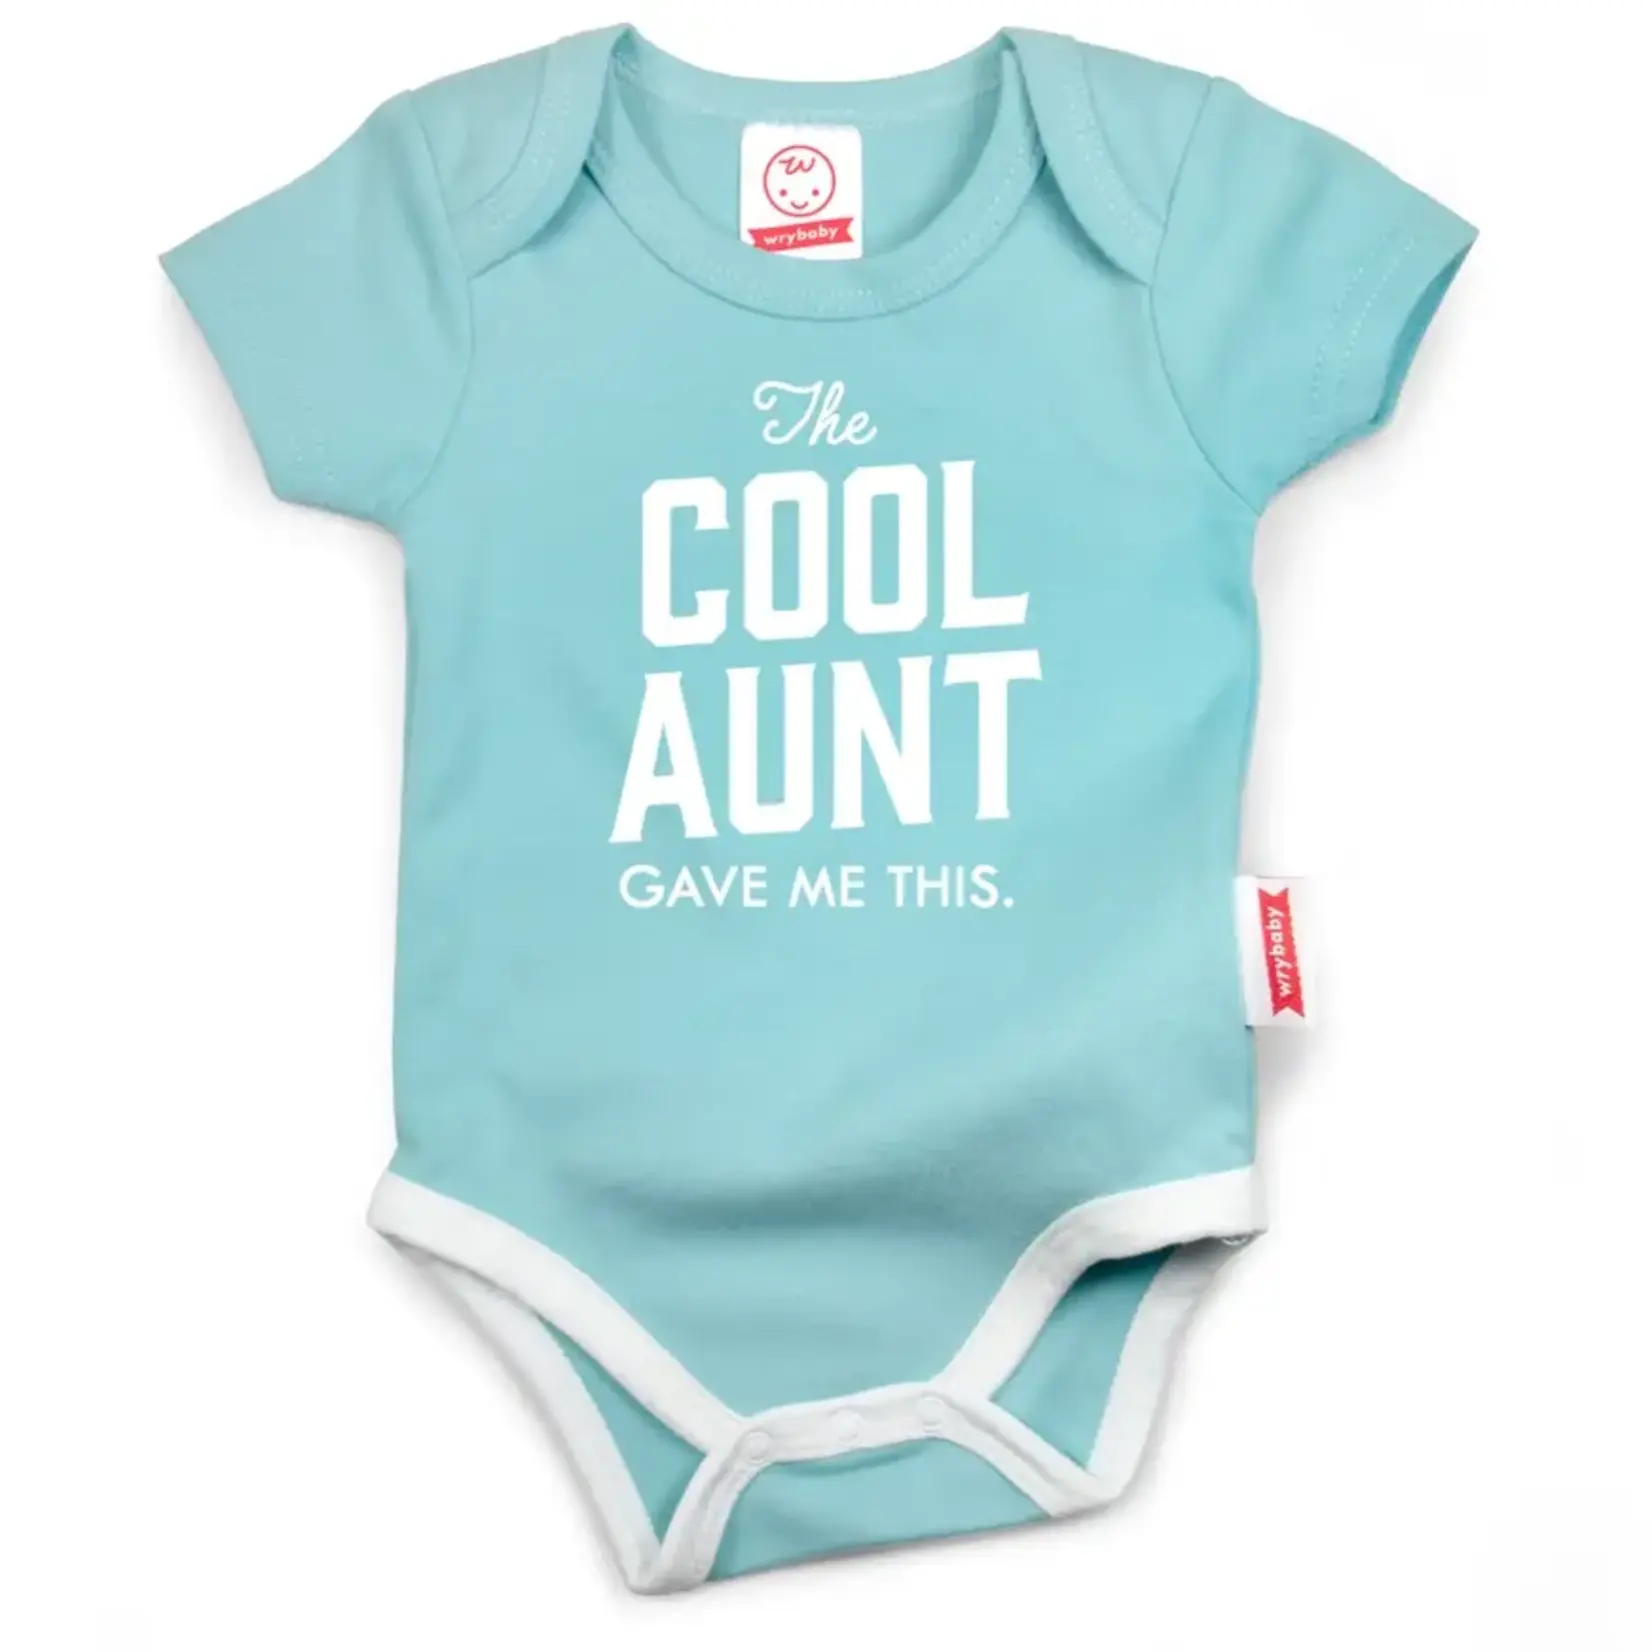 "The Cool Aunt Gave Me This" Baby Onesie | 0-6 Months | Teal